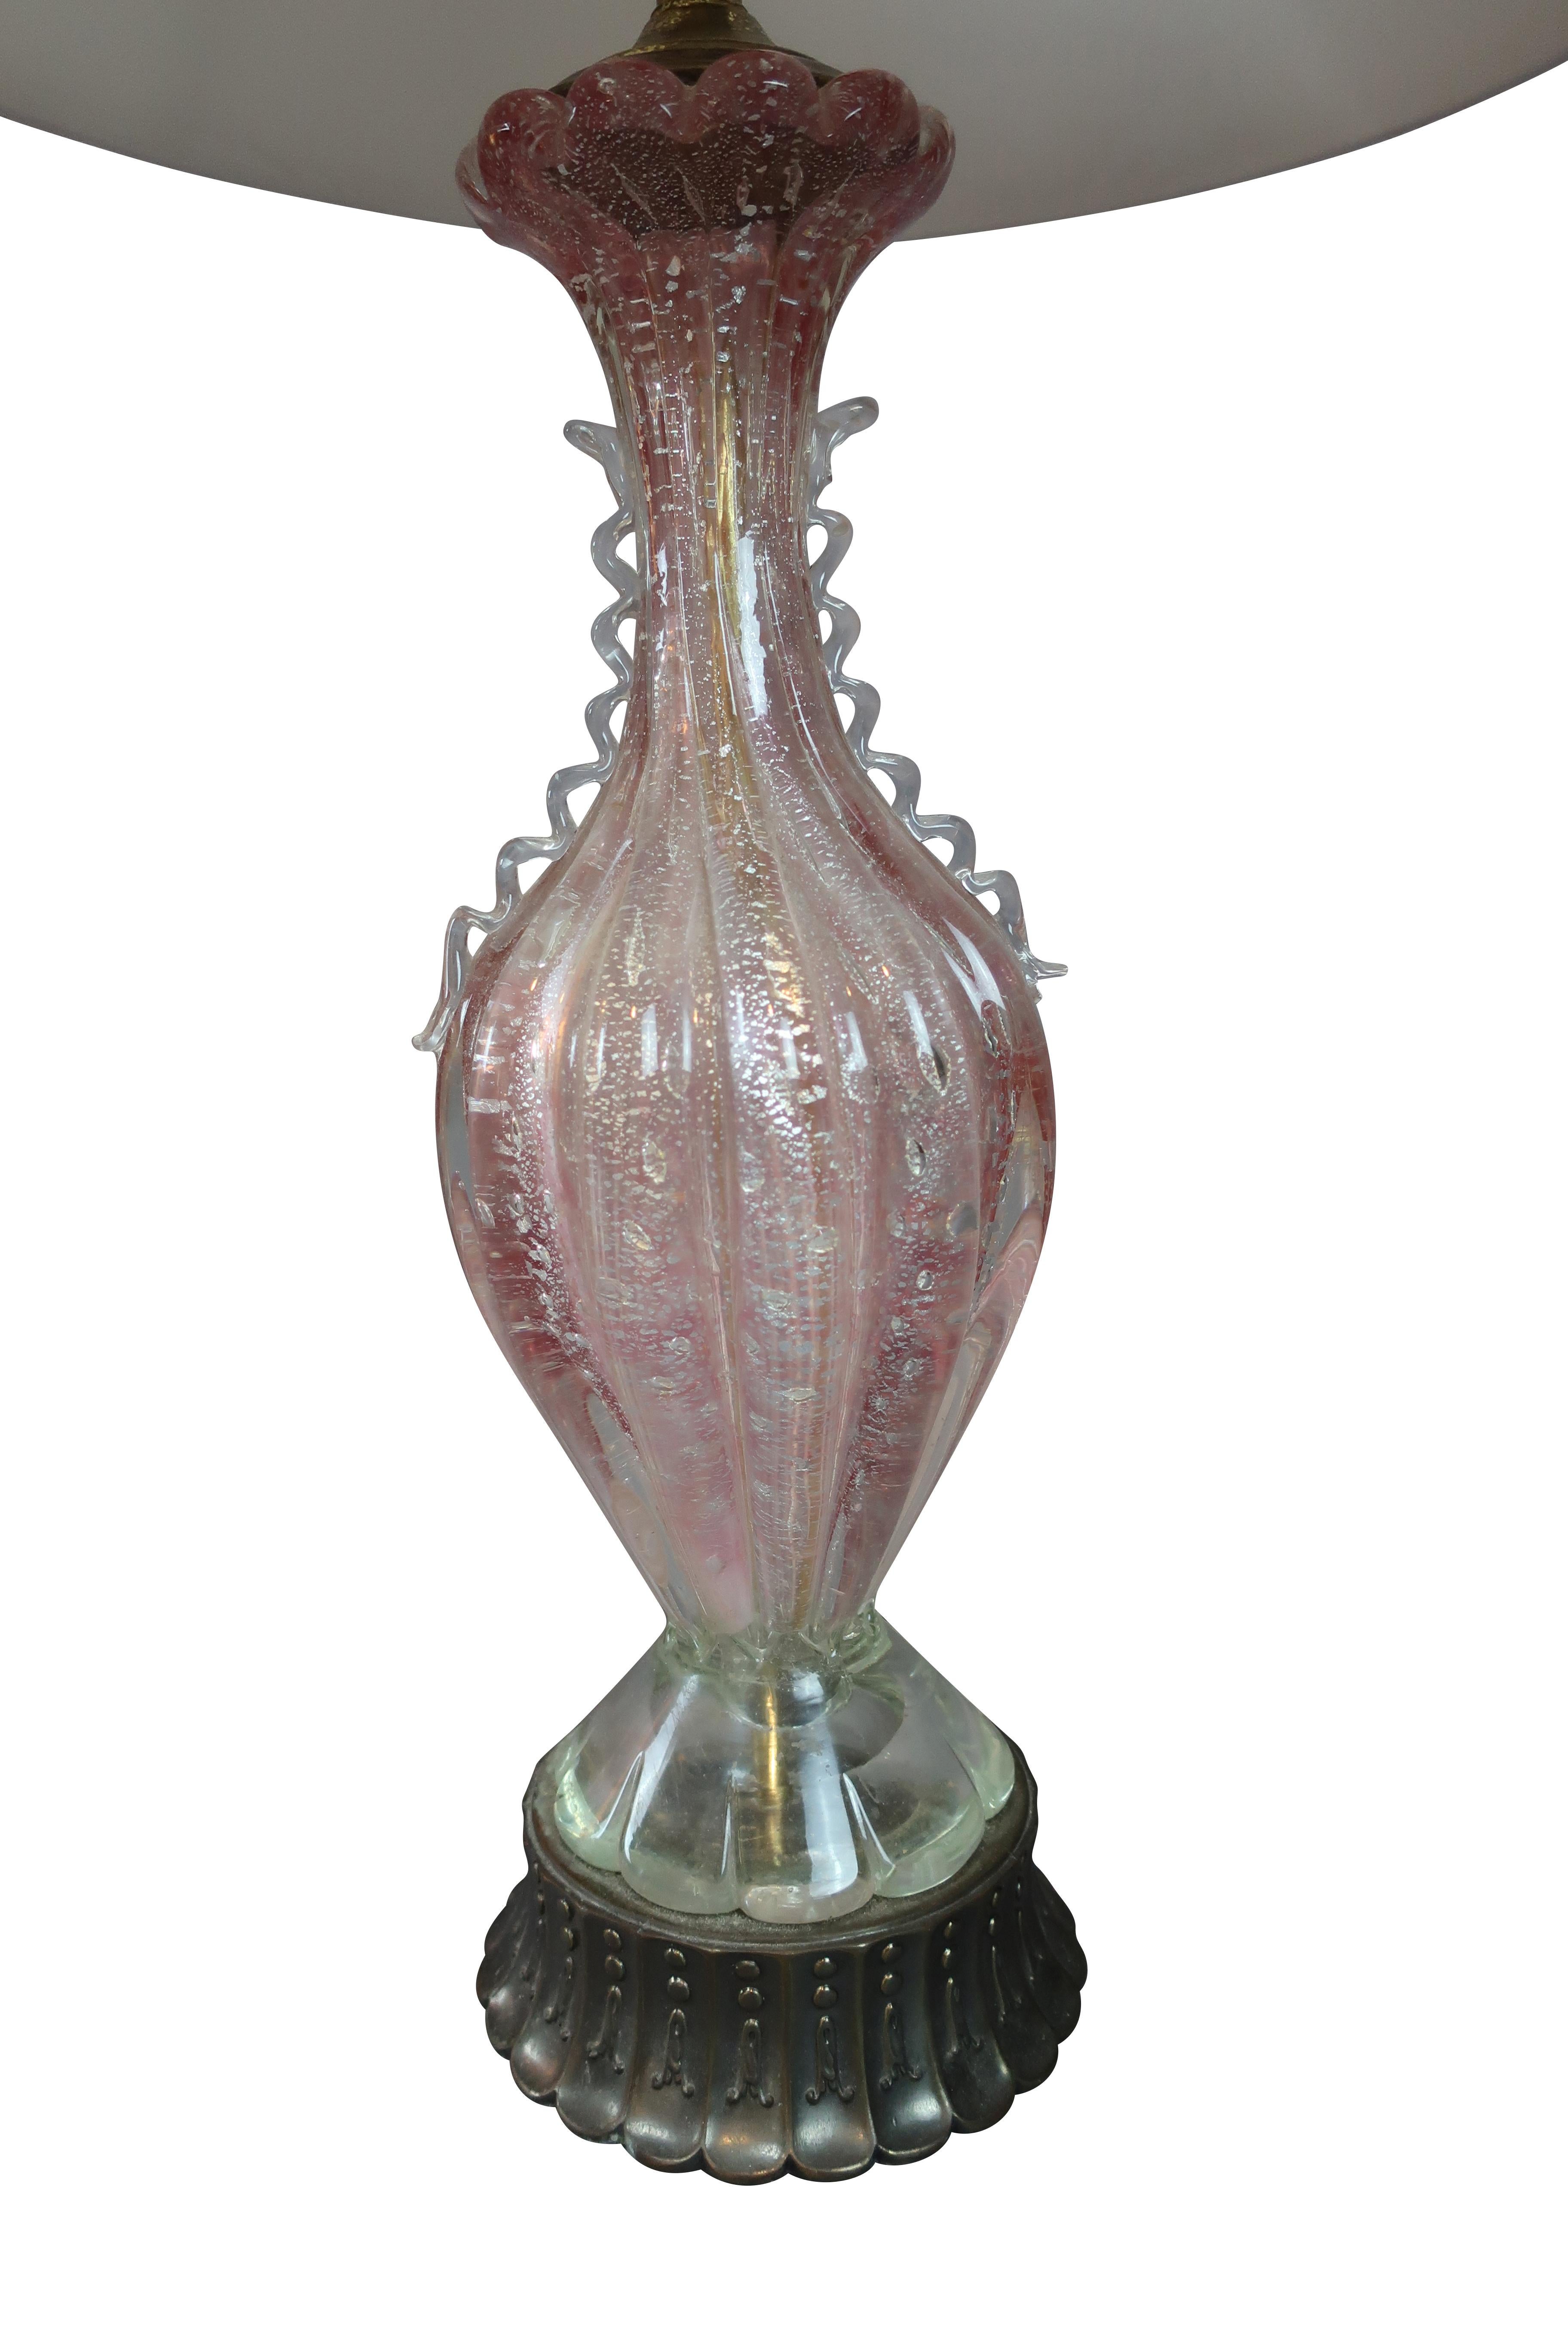 Pair of Italian Murano glass table lamps, baluster form, cased pink with silver bases, and custom silk white shades. Measures: 23 High by 7.0 diameter. Rewired to US 120V.